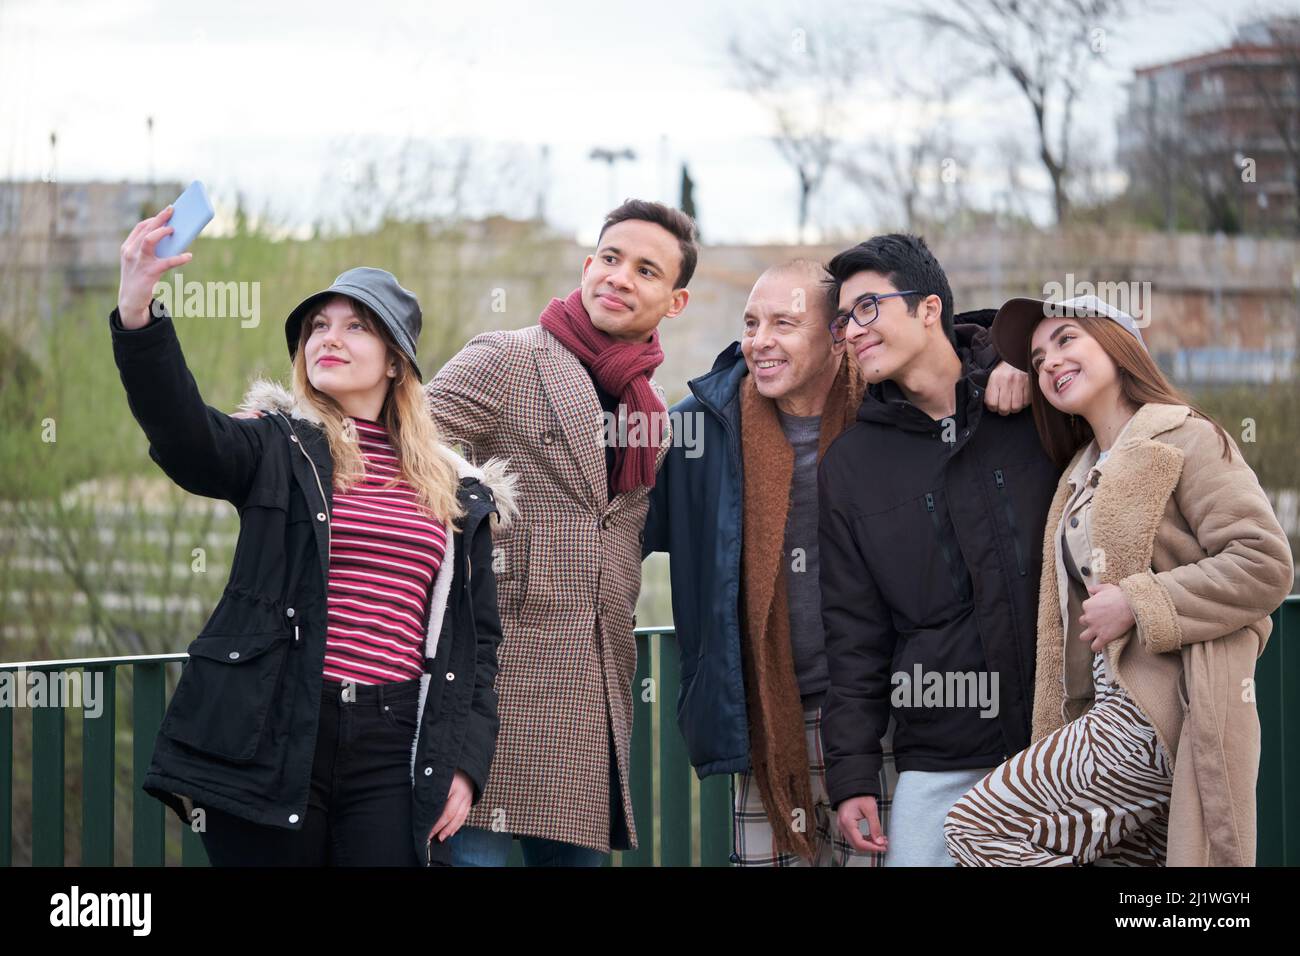 Group of friends of different ages and ethnicities taking a selfie outdoors. Stock Photo